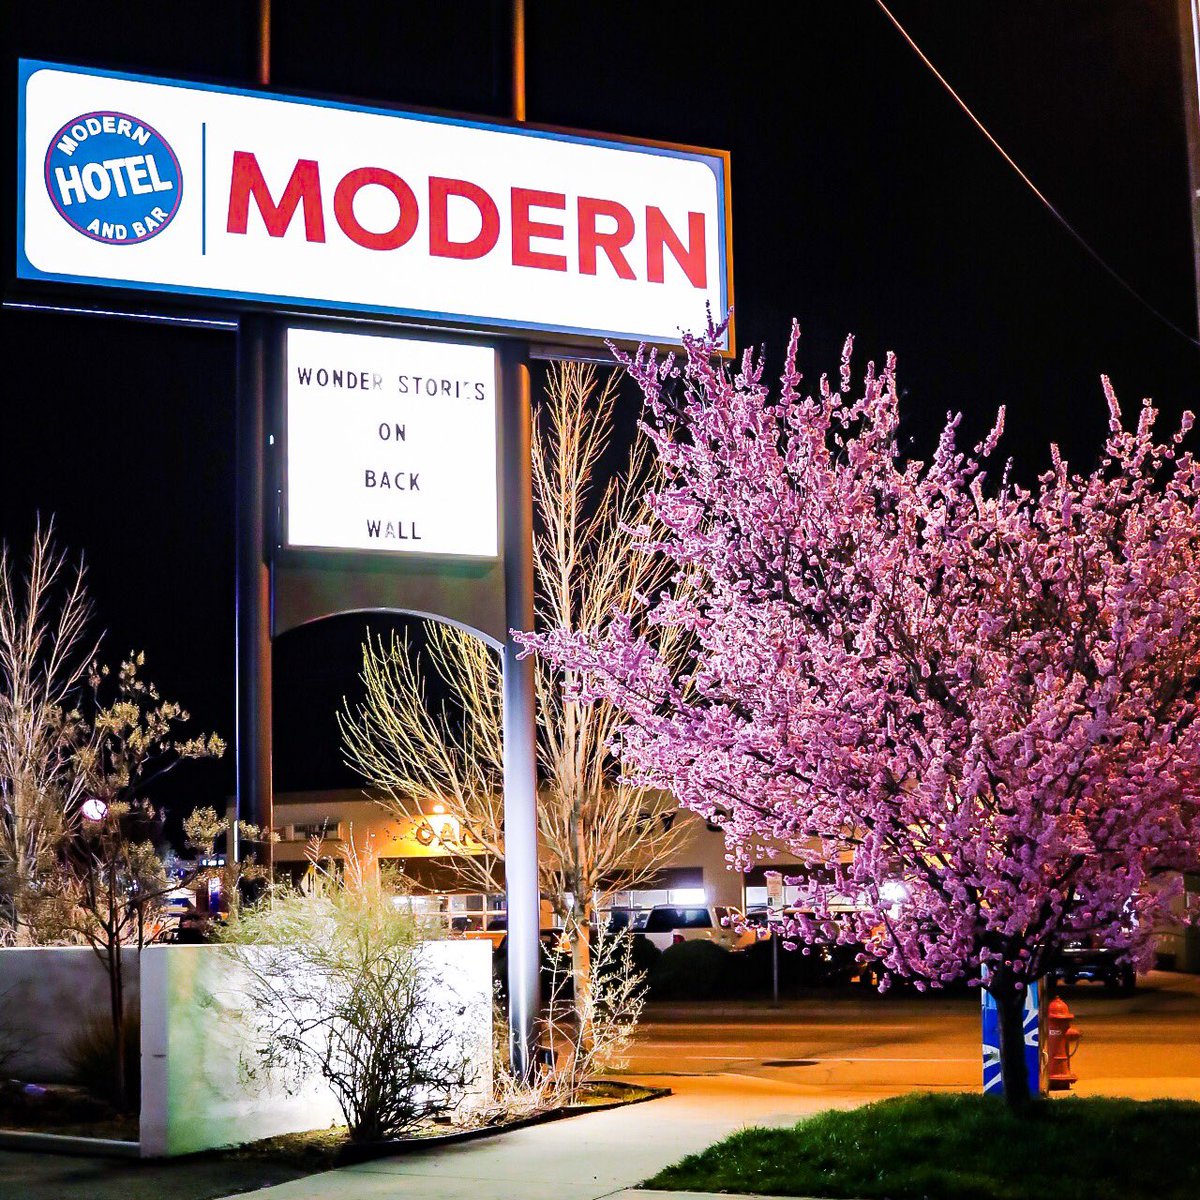 Nighttime inspiration while staying at @modernhotel 
#thisisboise #photography 
I wanted to see if I could get this blooming tree to pop! Yay pink!